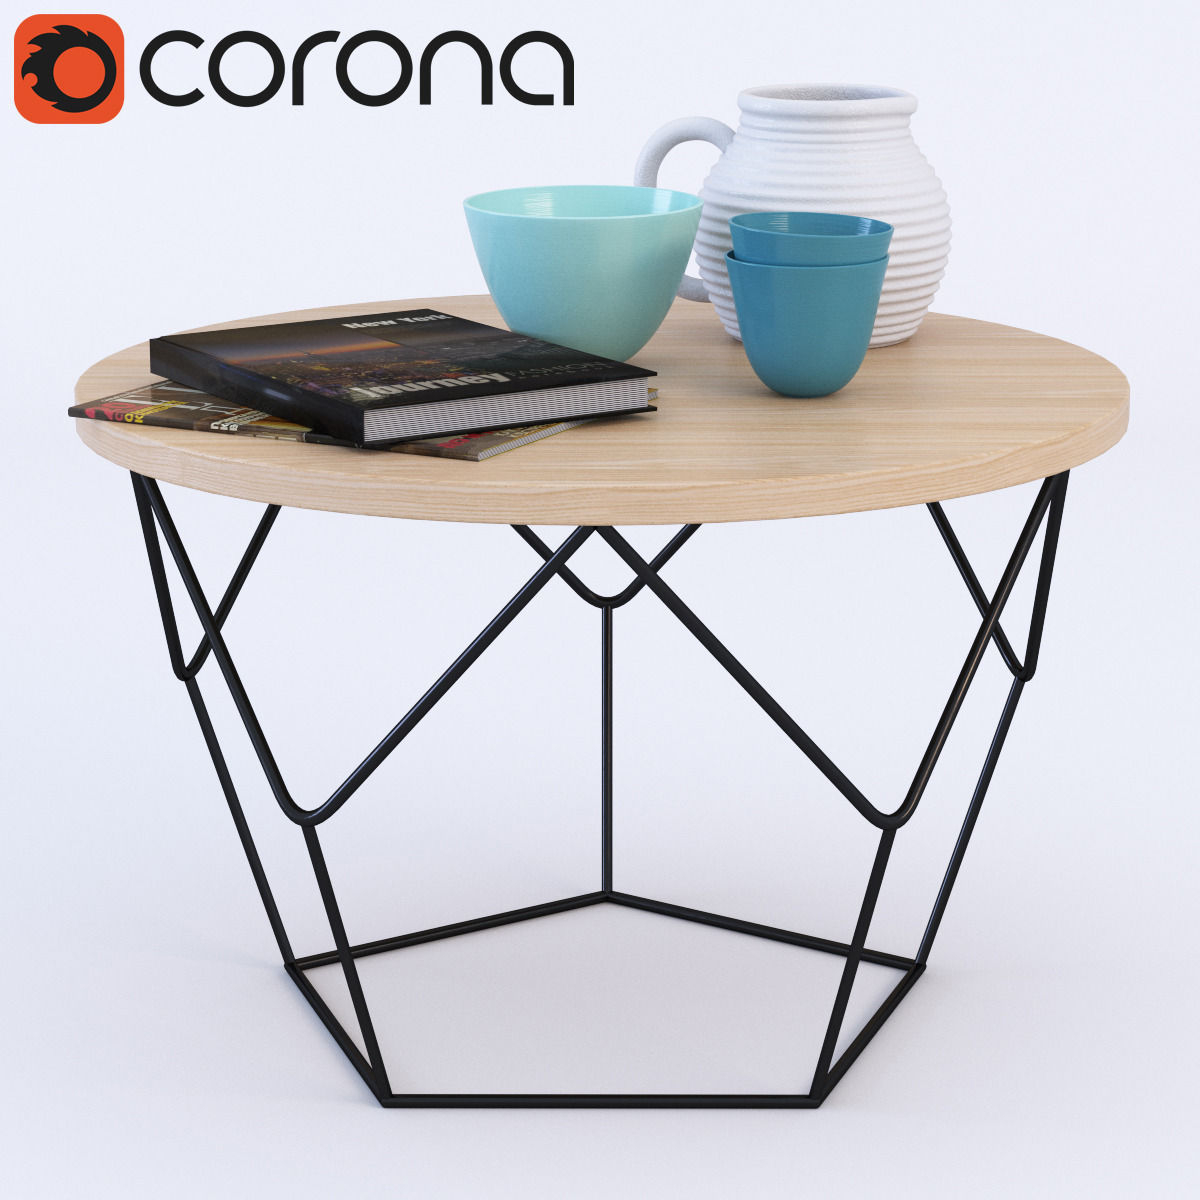 Origami Coffee Table West Elm Origami Coffee Table 3d Model